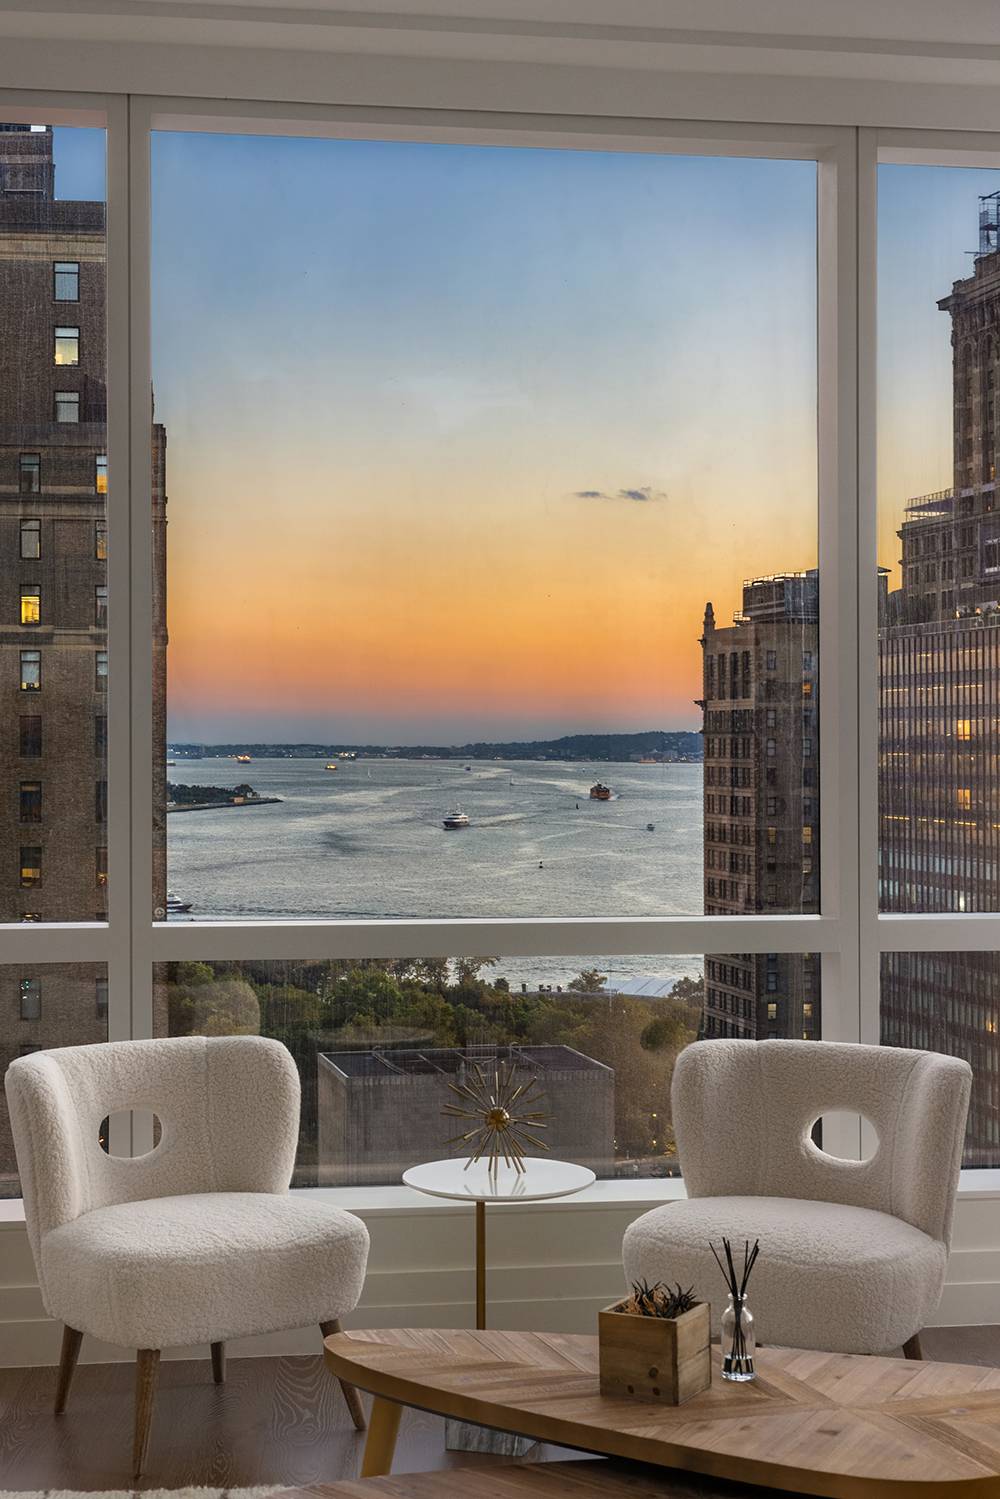 Immediate Occupancy Model Residences Open by Appointment Introducing 77 Greenwich St Views You ll DREAM about.